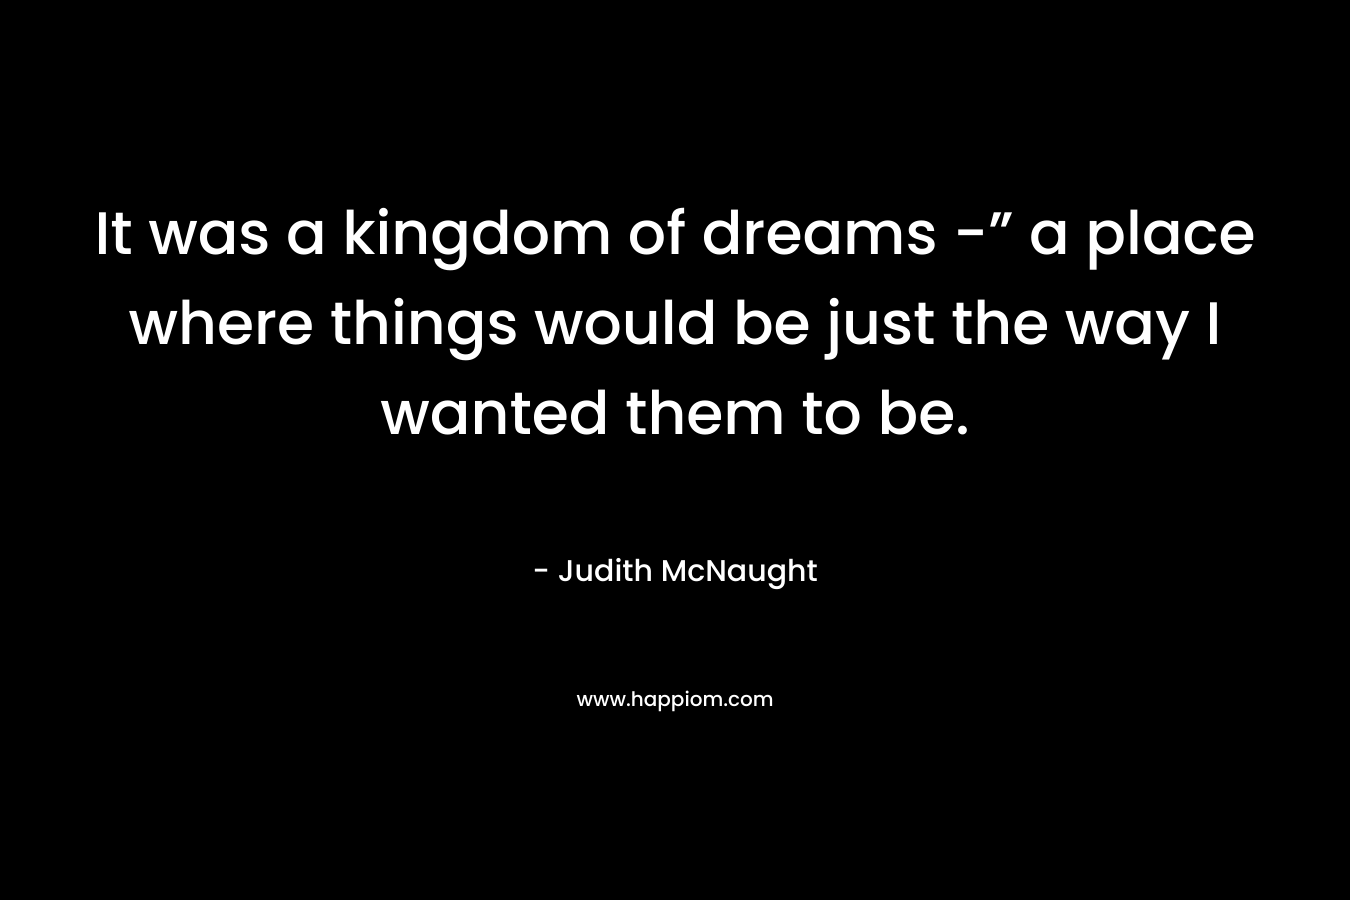 It was a kingdom of dreams -” a place where things would be just the way I wanted them to be.